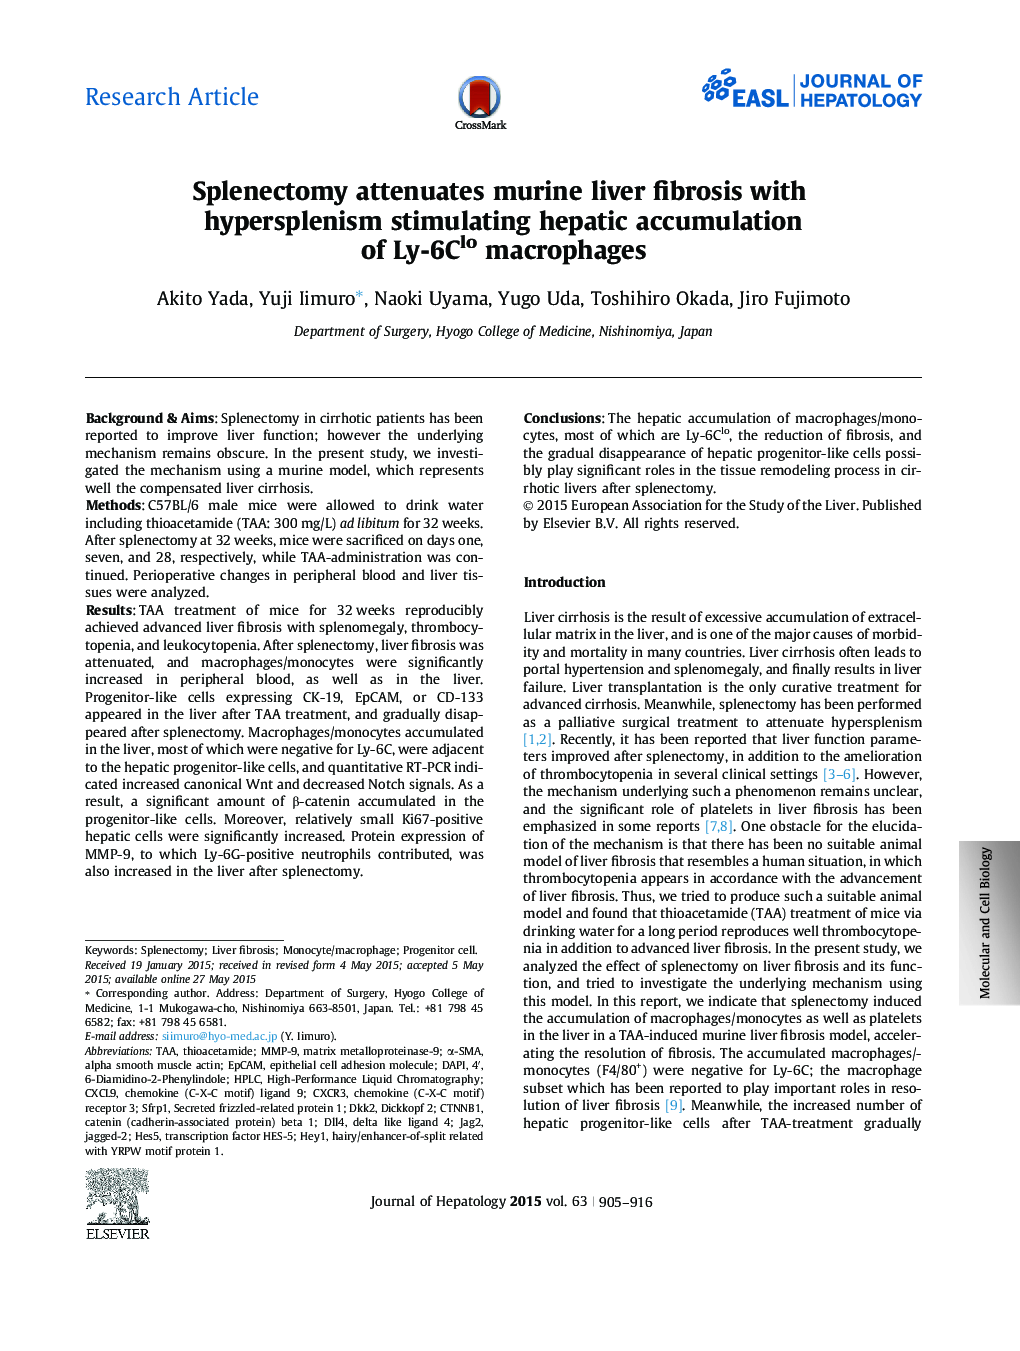 Research ArticleSplenectomy attenuates murine liver fibrosis with hypersplenism stimulating hepatic accumulation of Ly-6Clo macrophages